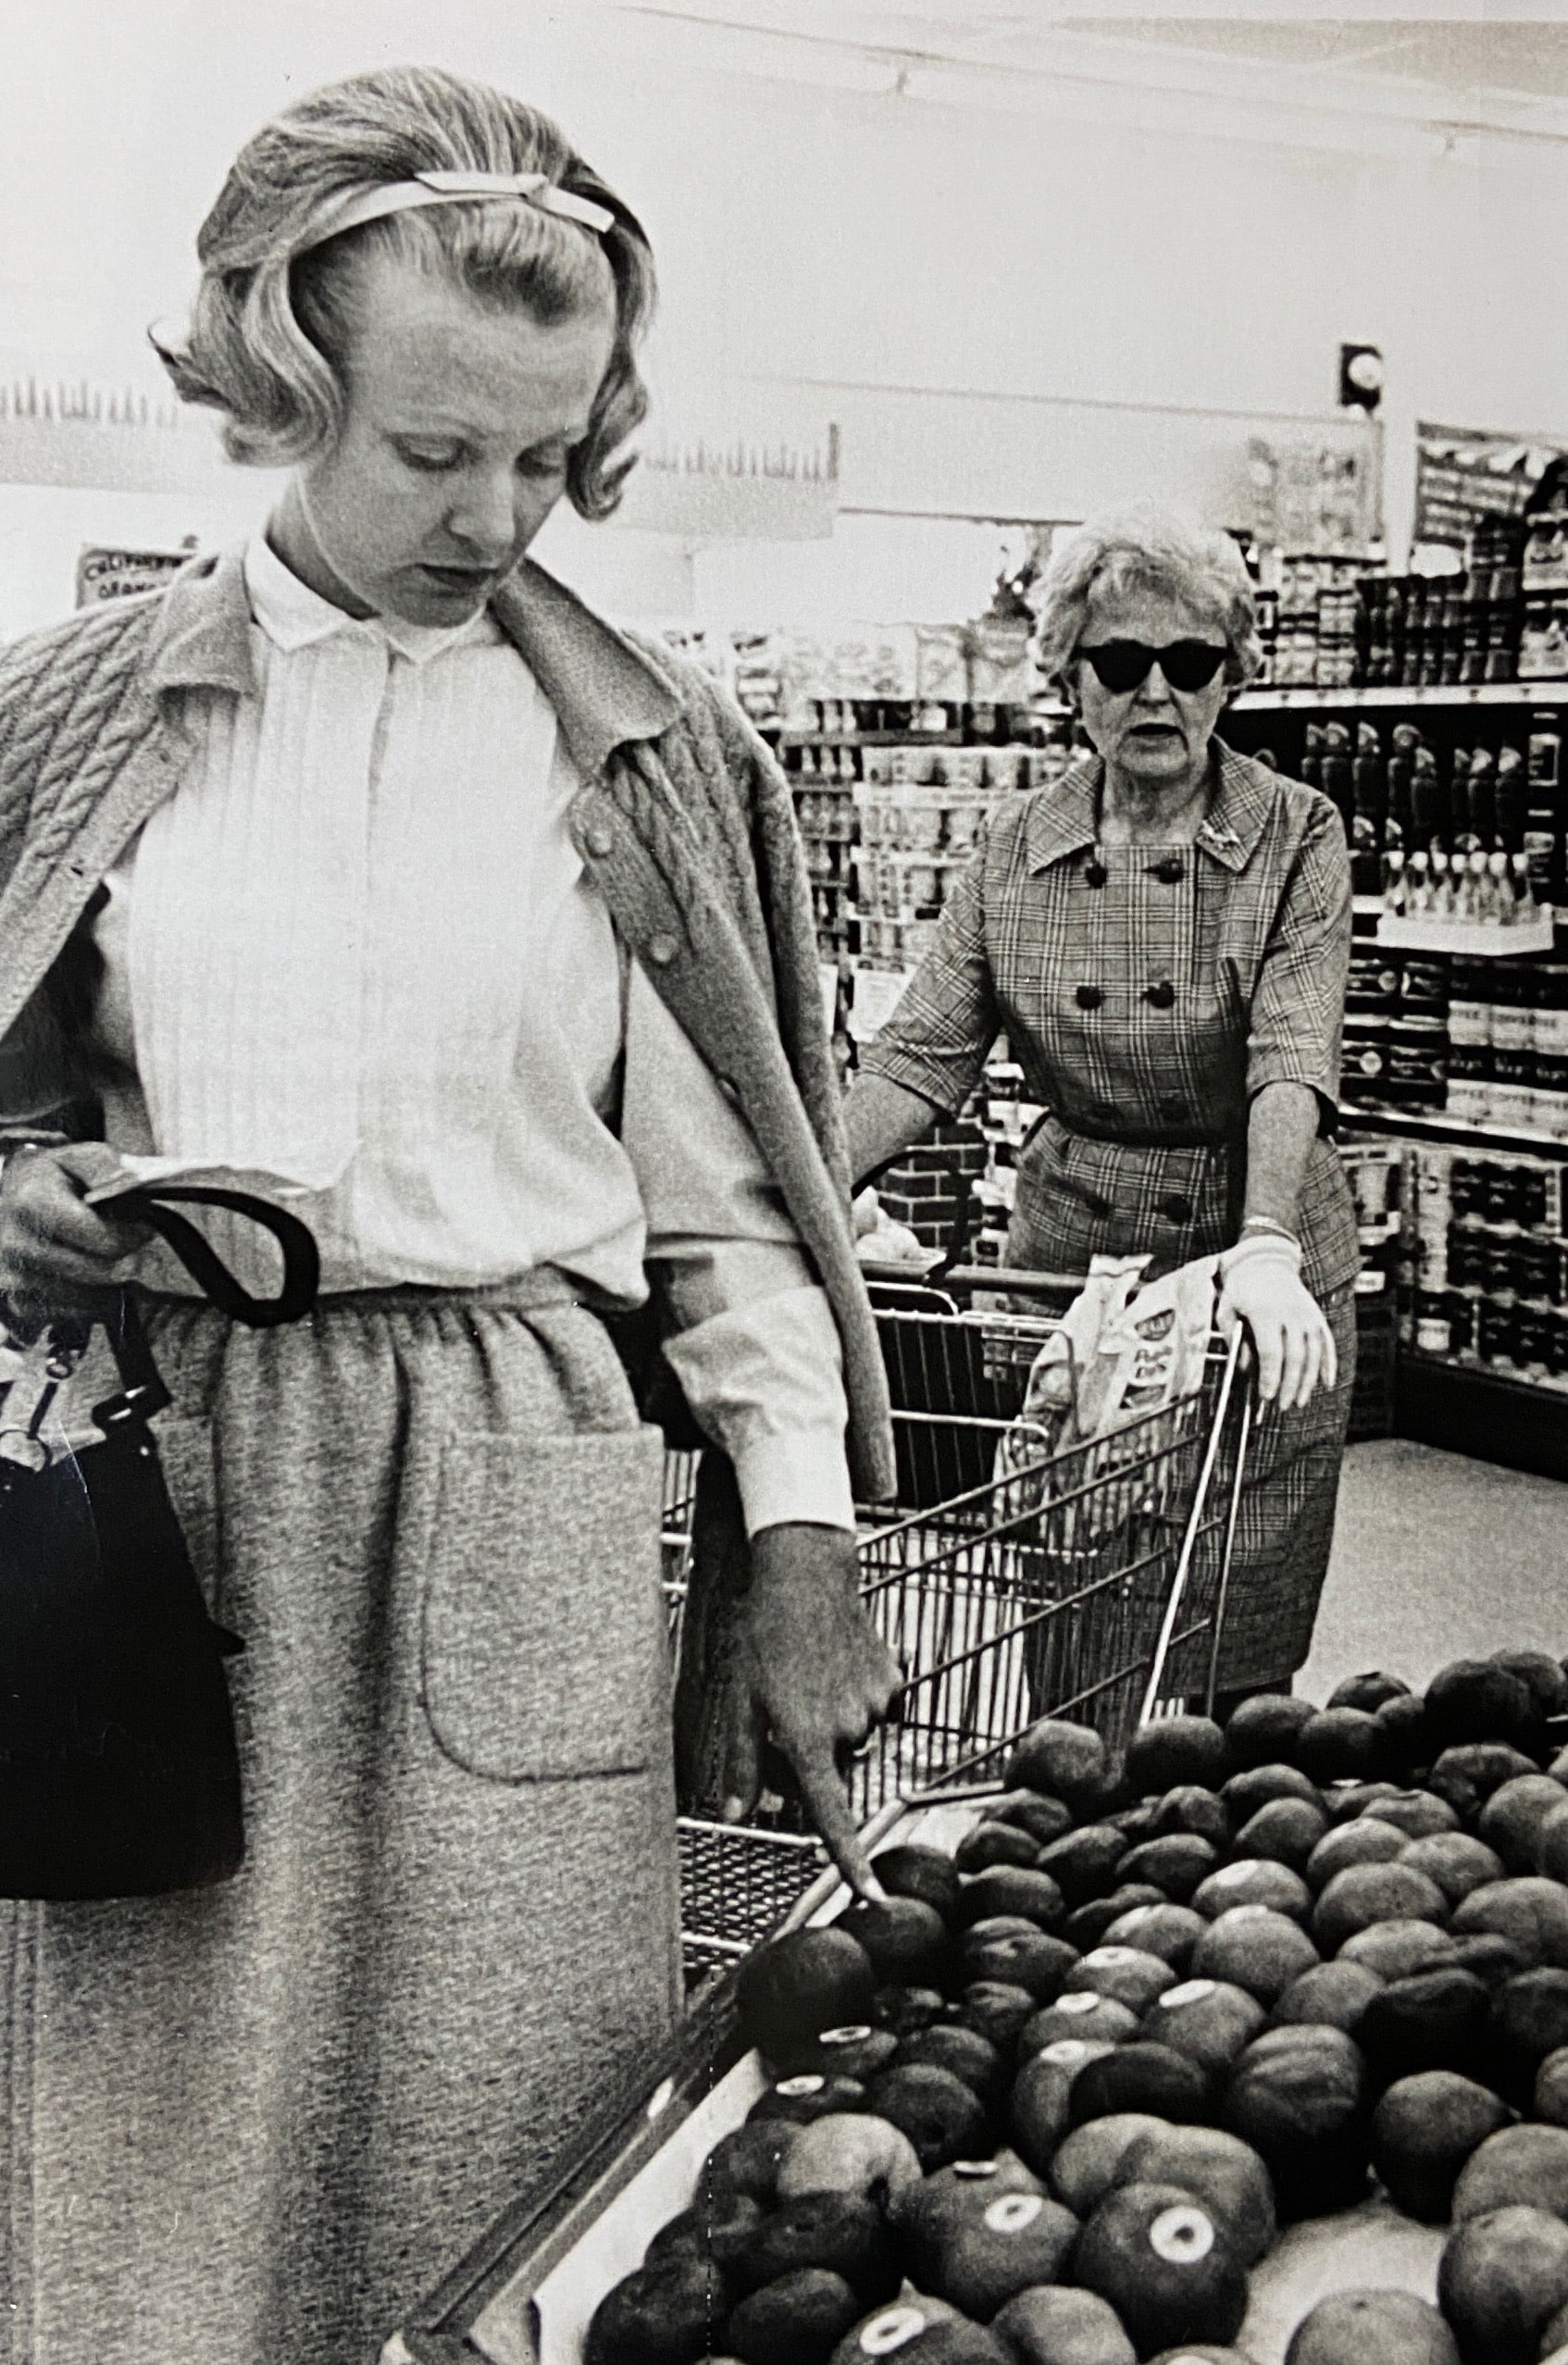 Susan and her Mother, Ruth Bugbee doing some shopping during Frank's Gemini mission